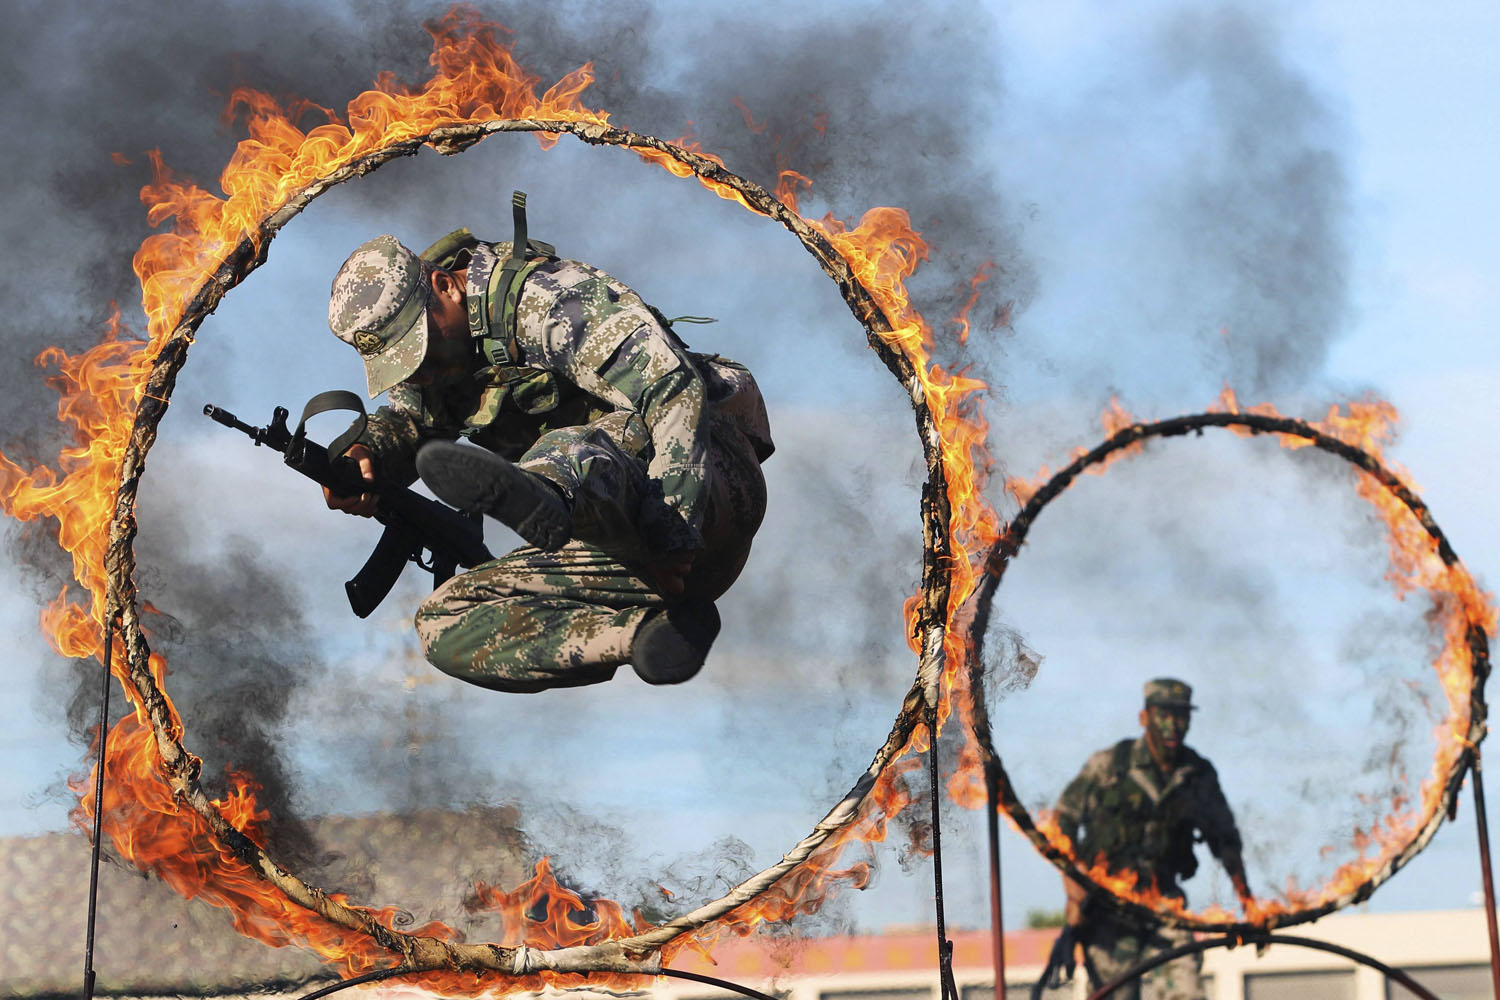 Aug. 1, 2013. A soldier from the People's Liberation Army jumps through a ring of fire as part of training during the PLA Army Day in Wenzhou, Zhejiang province, China.